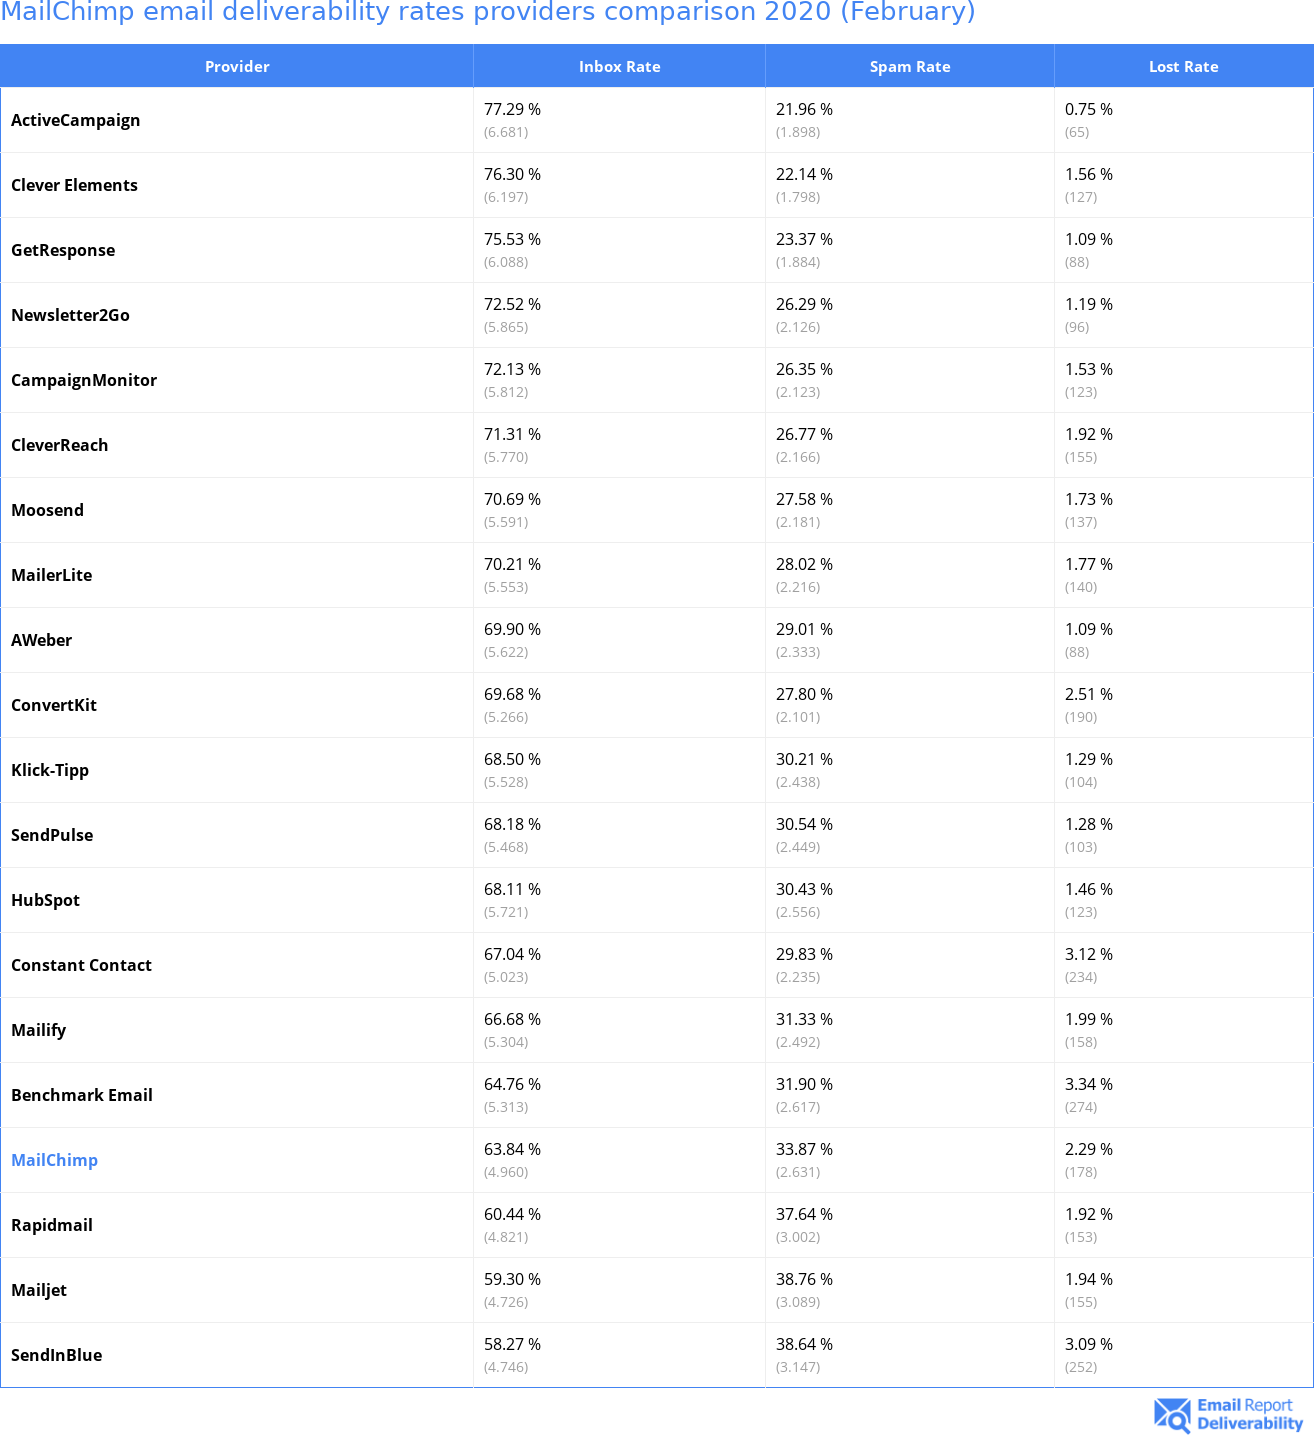 MailChimp email deliverability rates providers comparison 2020 (February)